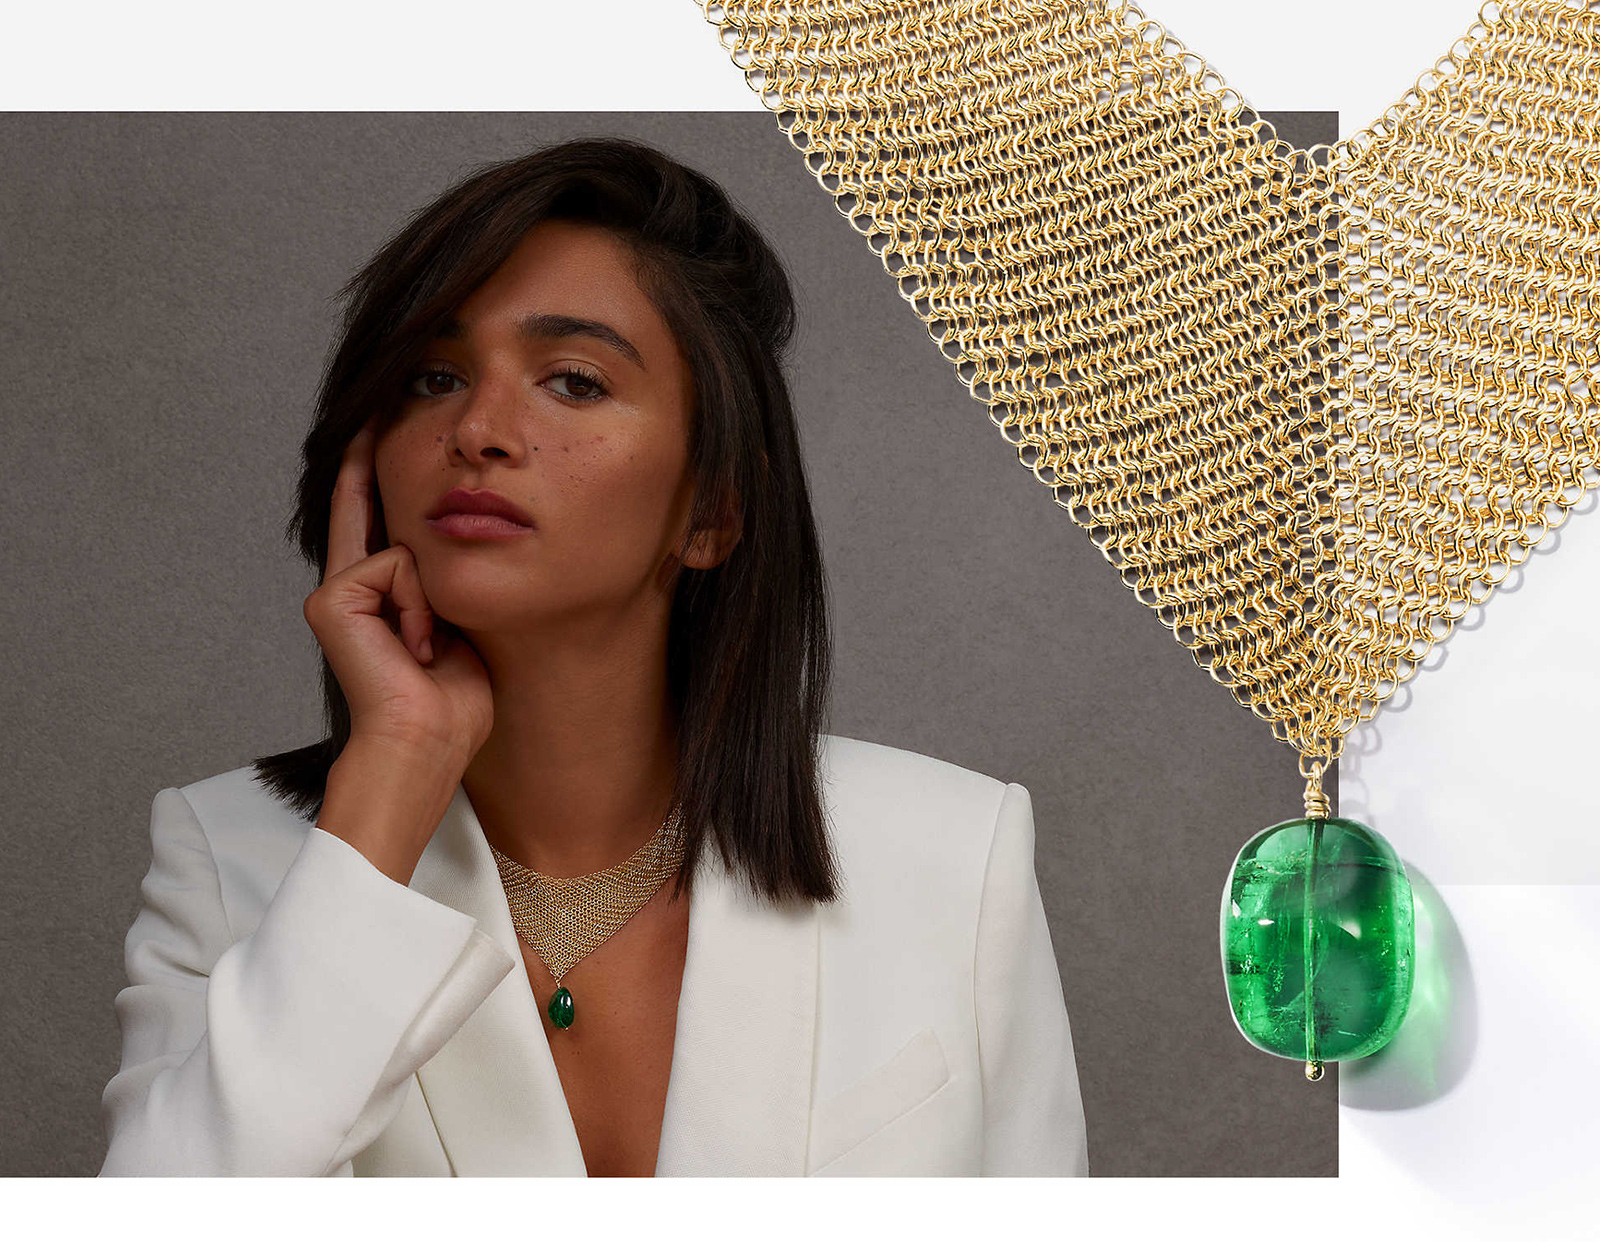 Elsa Peretti Mesh necklace in yellow gold with a tumbled emerald bead, styled by Kate Young for Tiffany & Co.